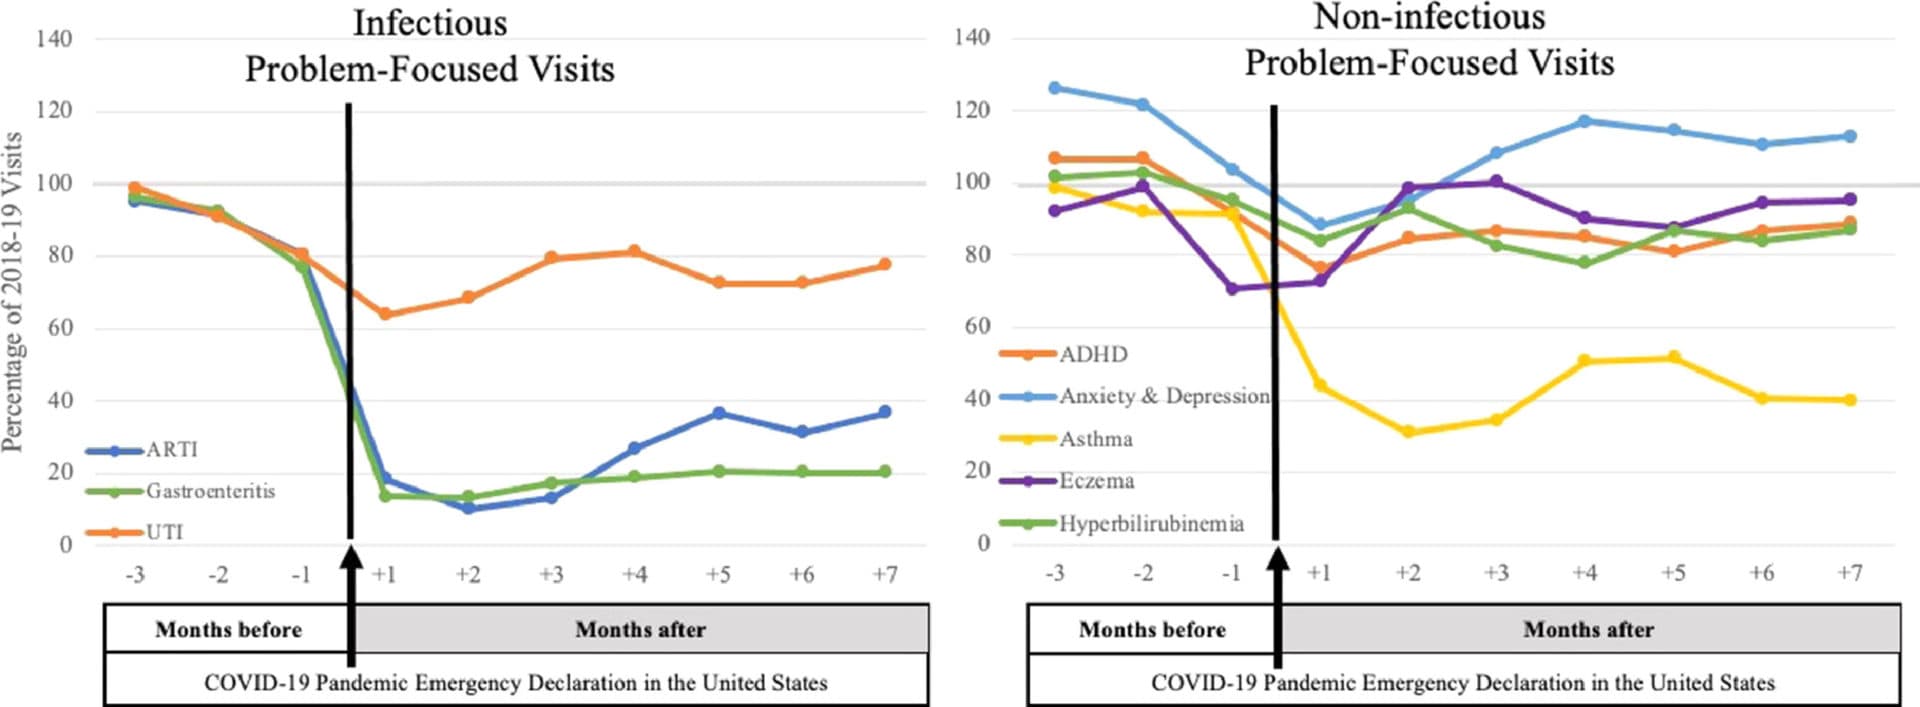 The graphs above show problem-focused visits for eight selected conditions conducted by primary care clinicians in 2020 as a percentage of prior years 2018-2019. (Courtesy Academic Pediatrics)